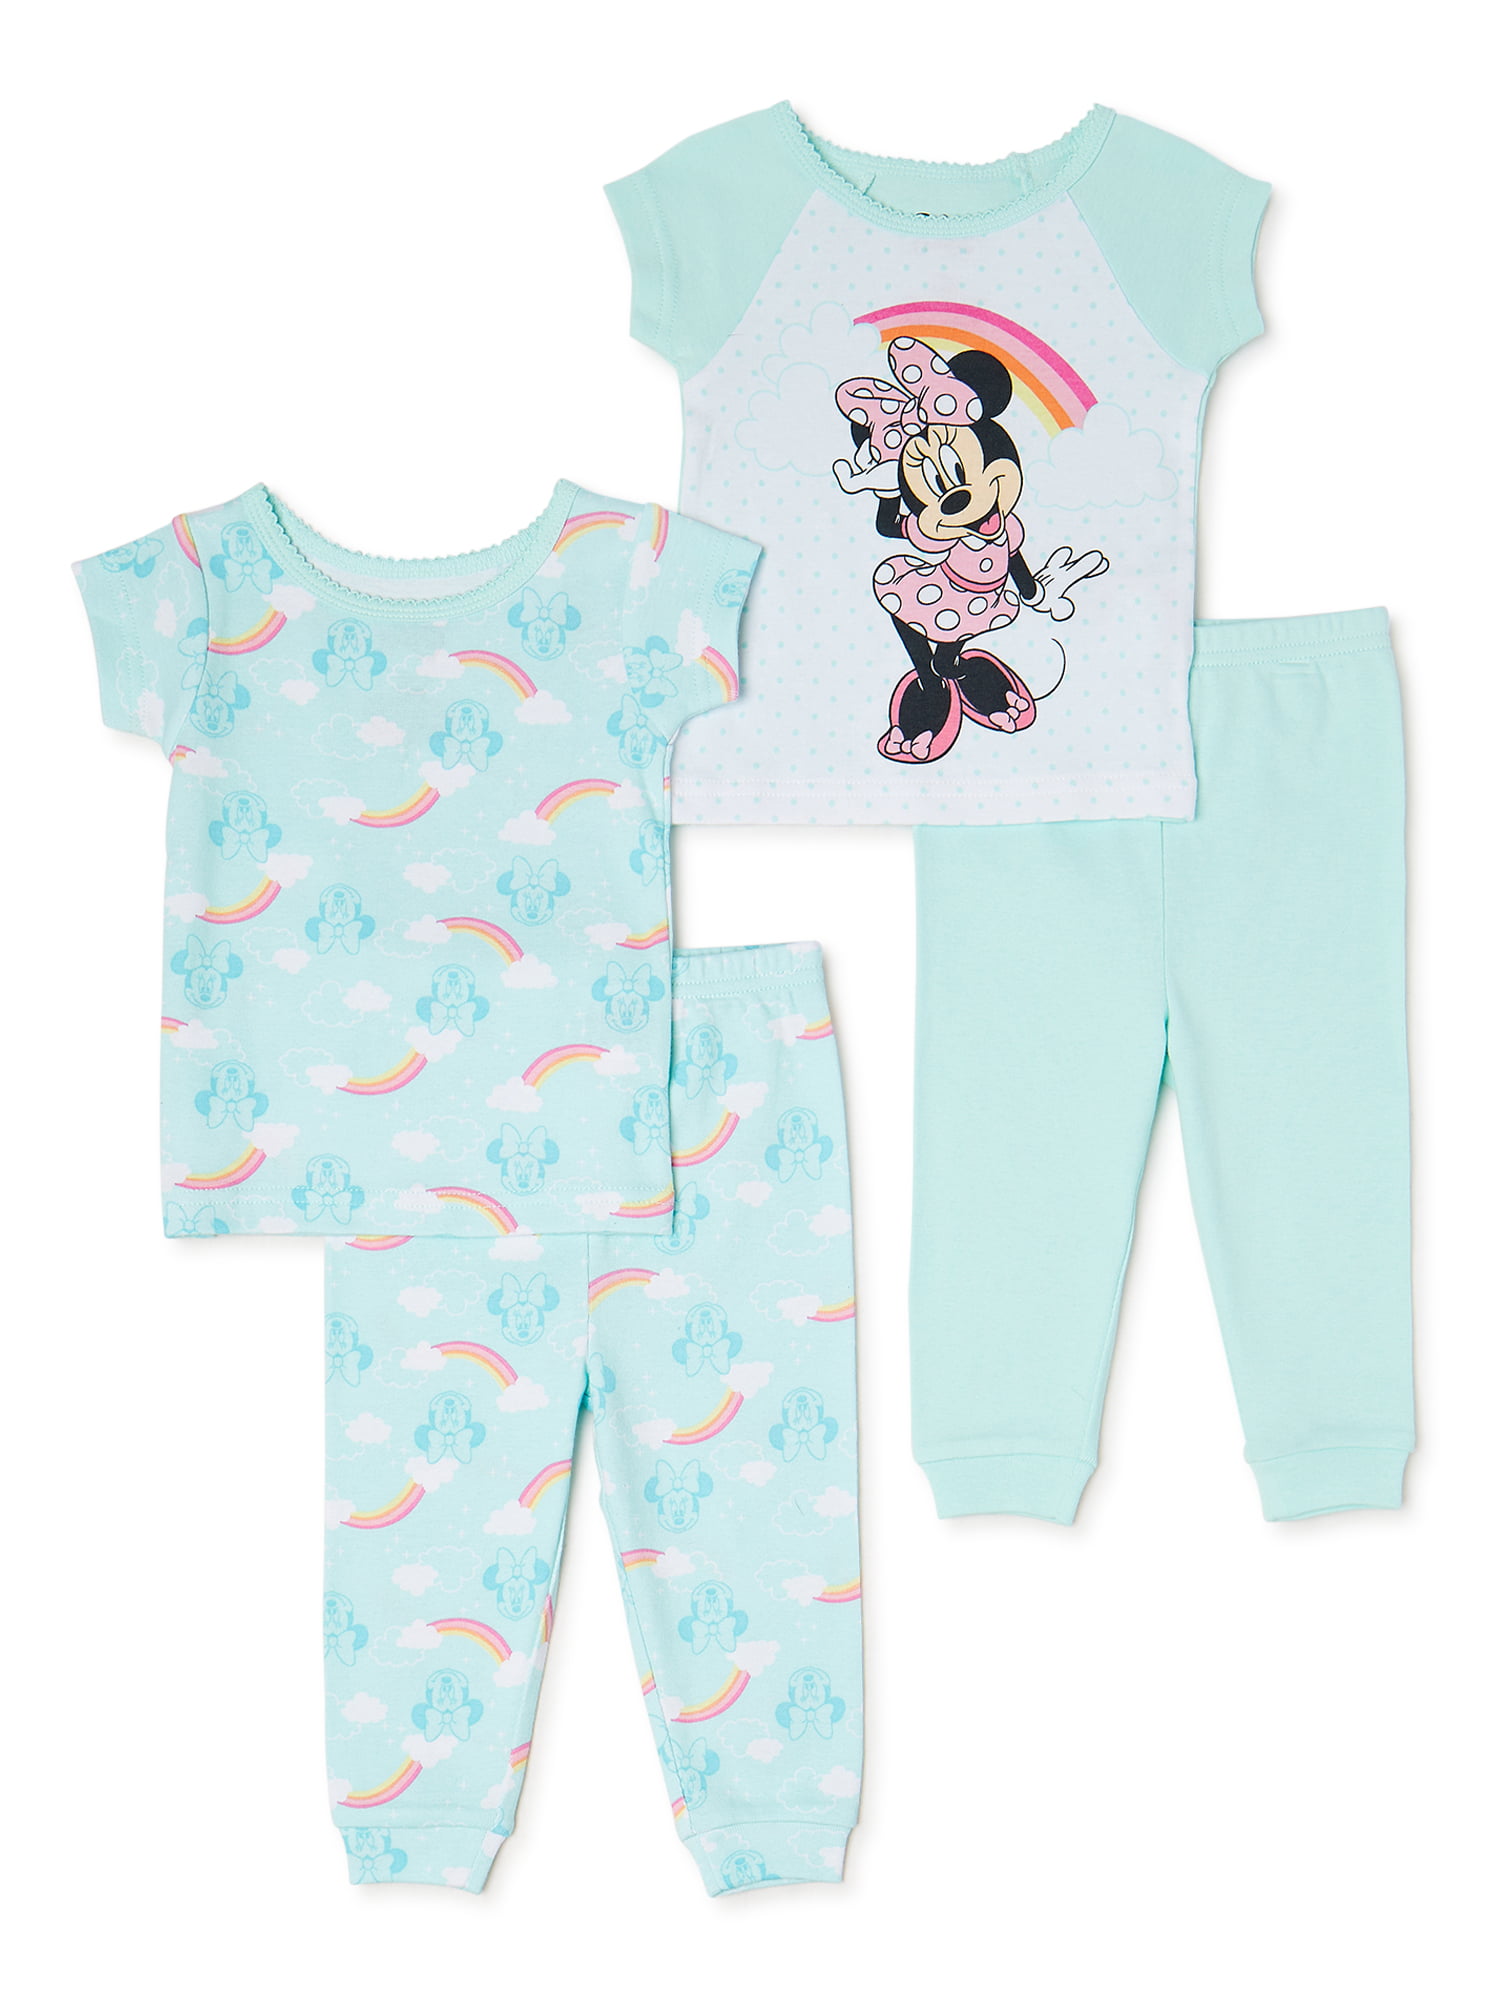 show original title Details about   Pajamas Baby Outfit Girl Disney Minnie Mouse 100% Cotton Pink White 